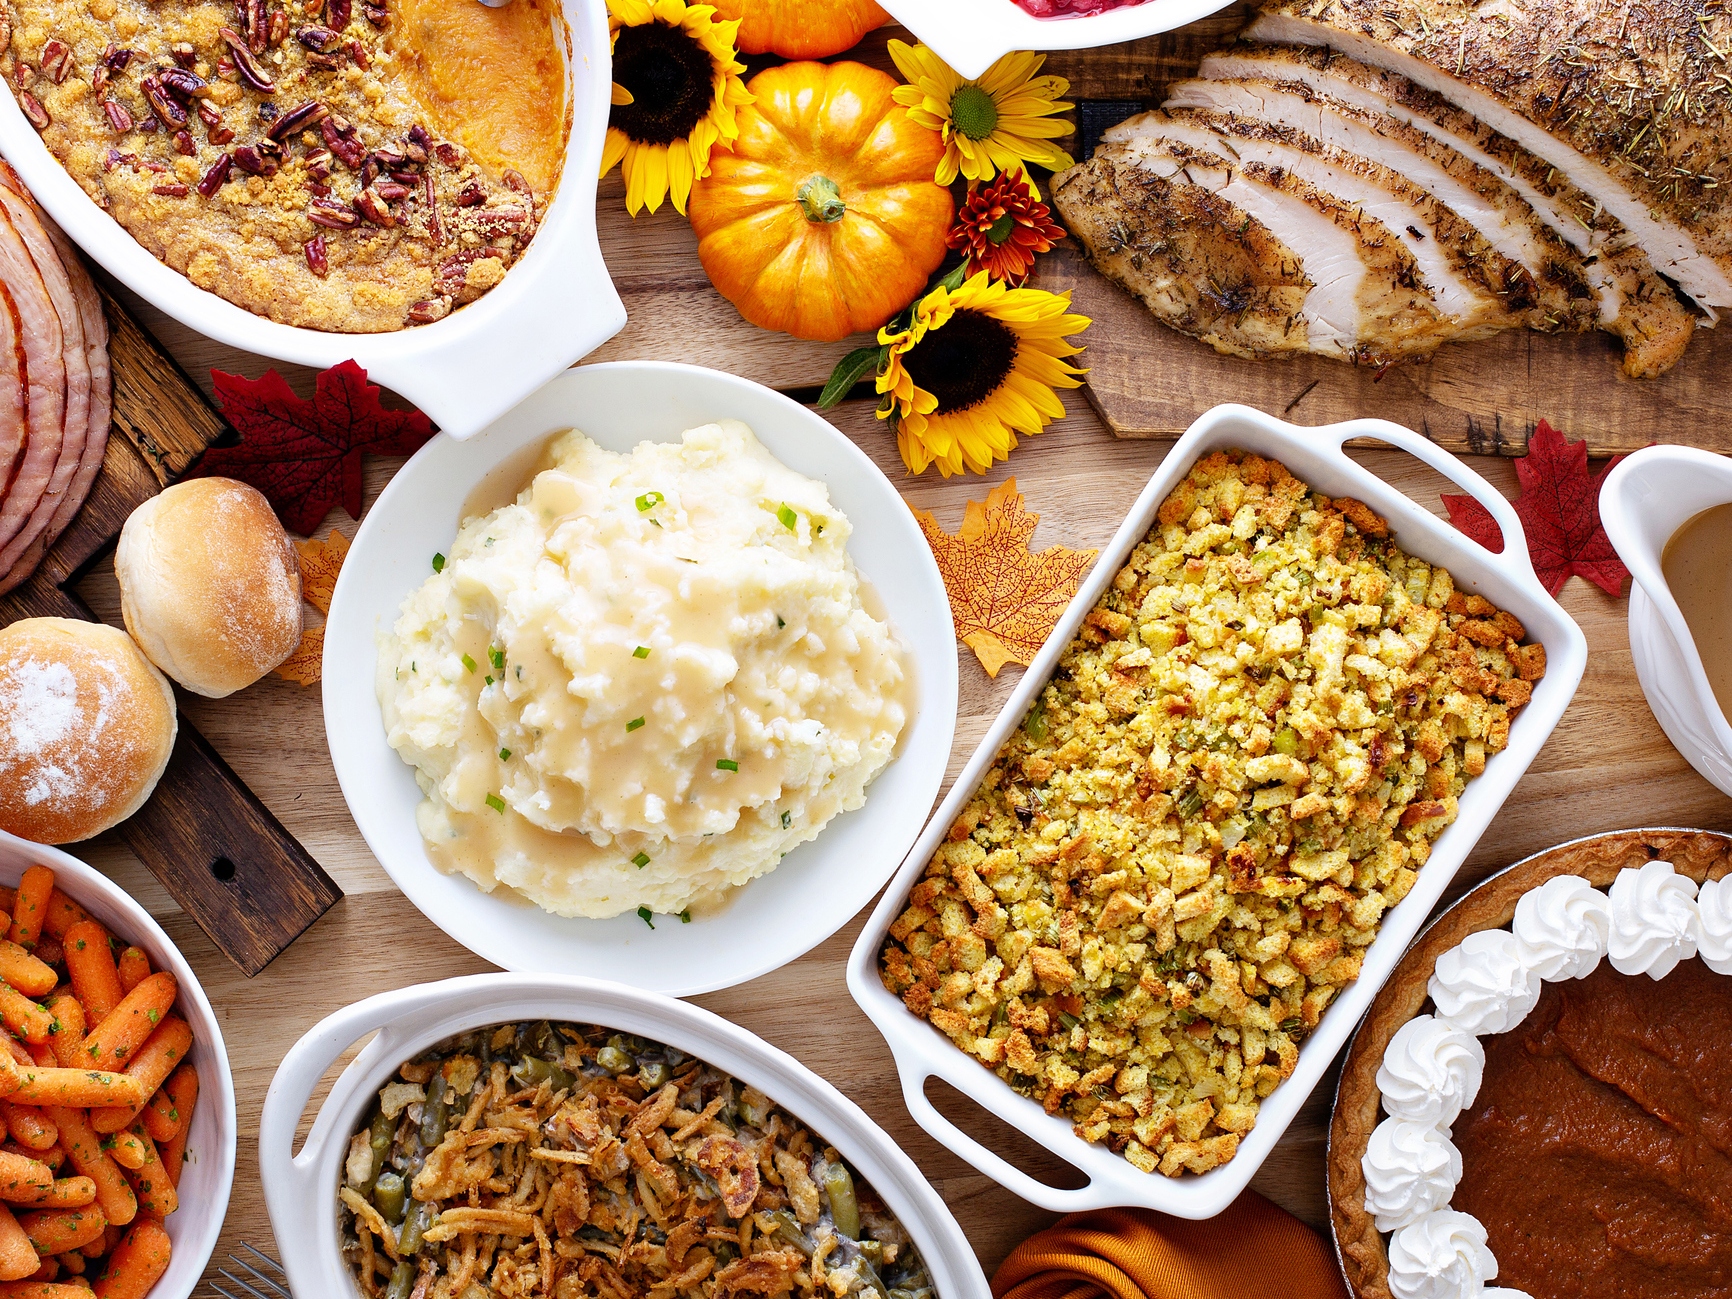 8 ways to survive holiday meals so you won’t have to diet after the New Year